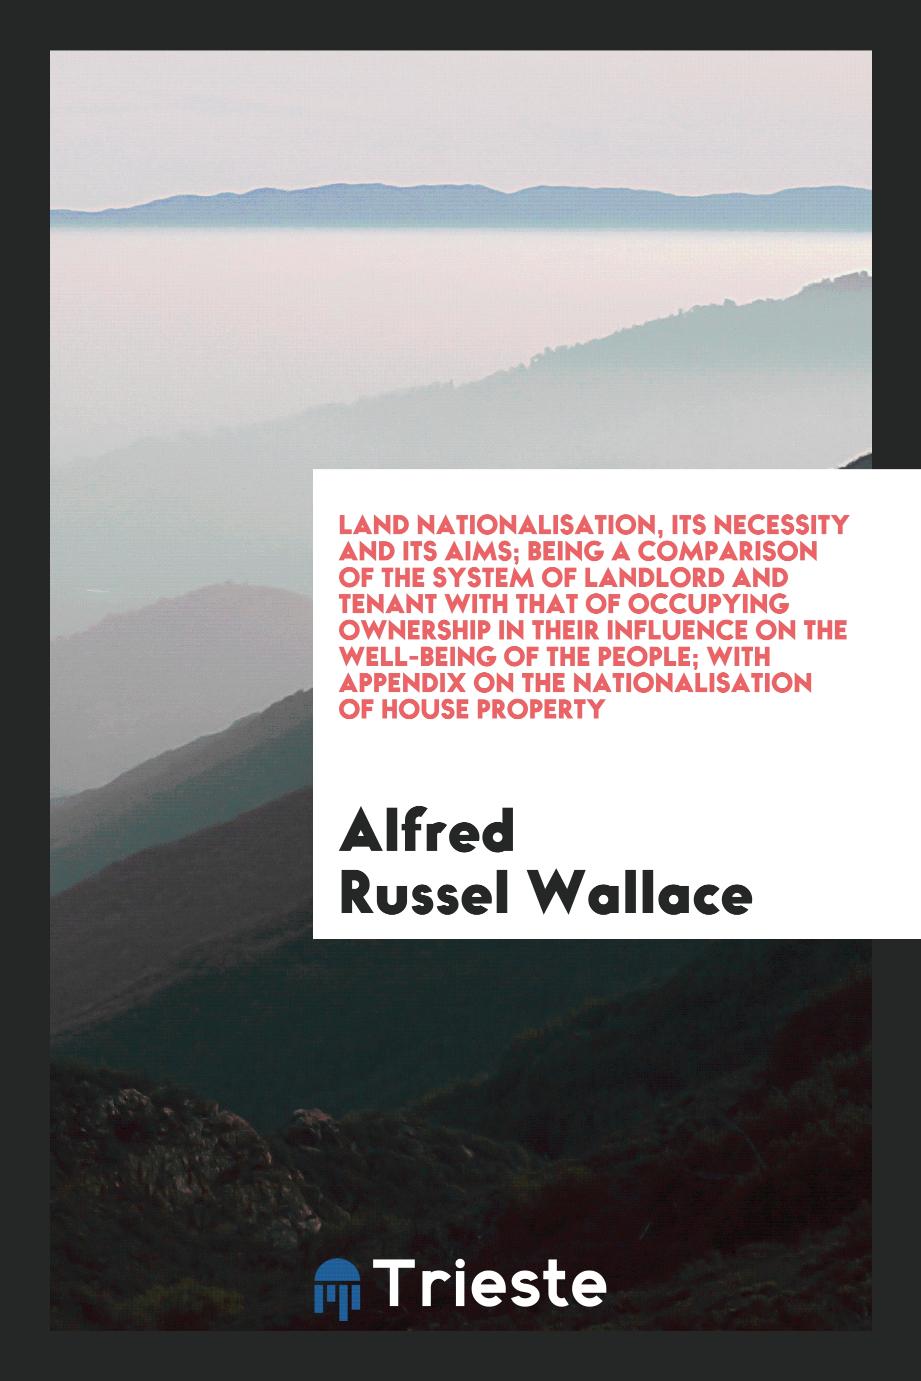 Land nationalisation, its necessity and its aims; being a comparison of the system of landlord and tenant with that of occupying ownership in their influence on the well-being of the people; with appendix on the nationalisation of house property